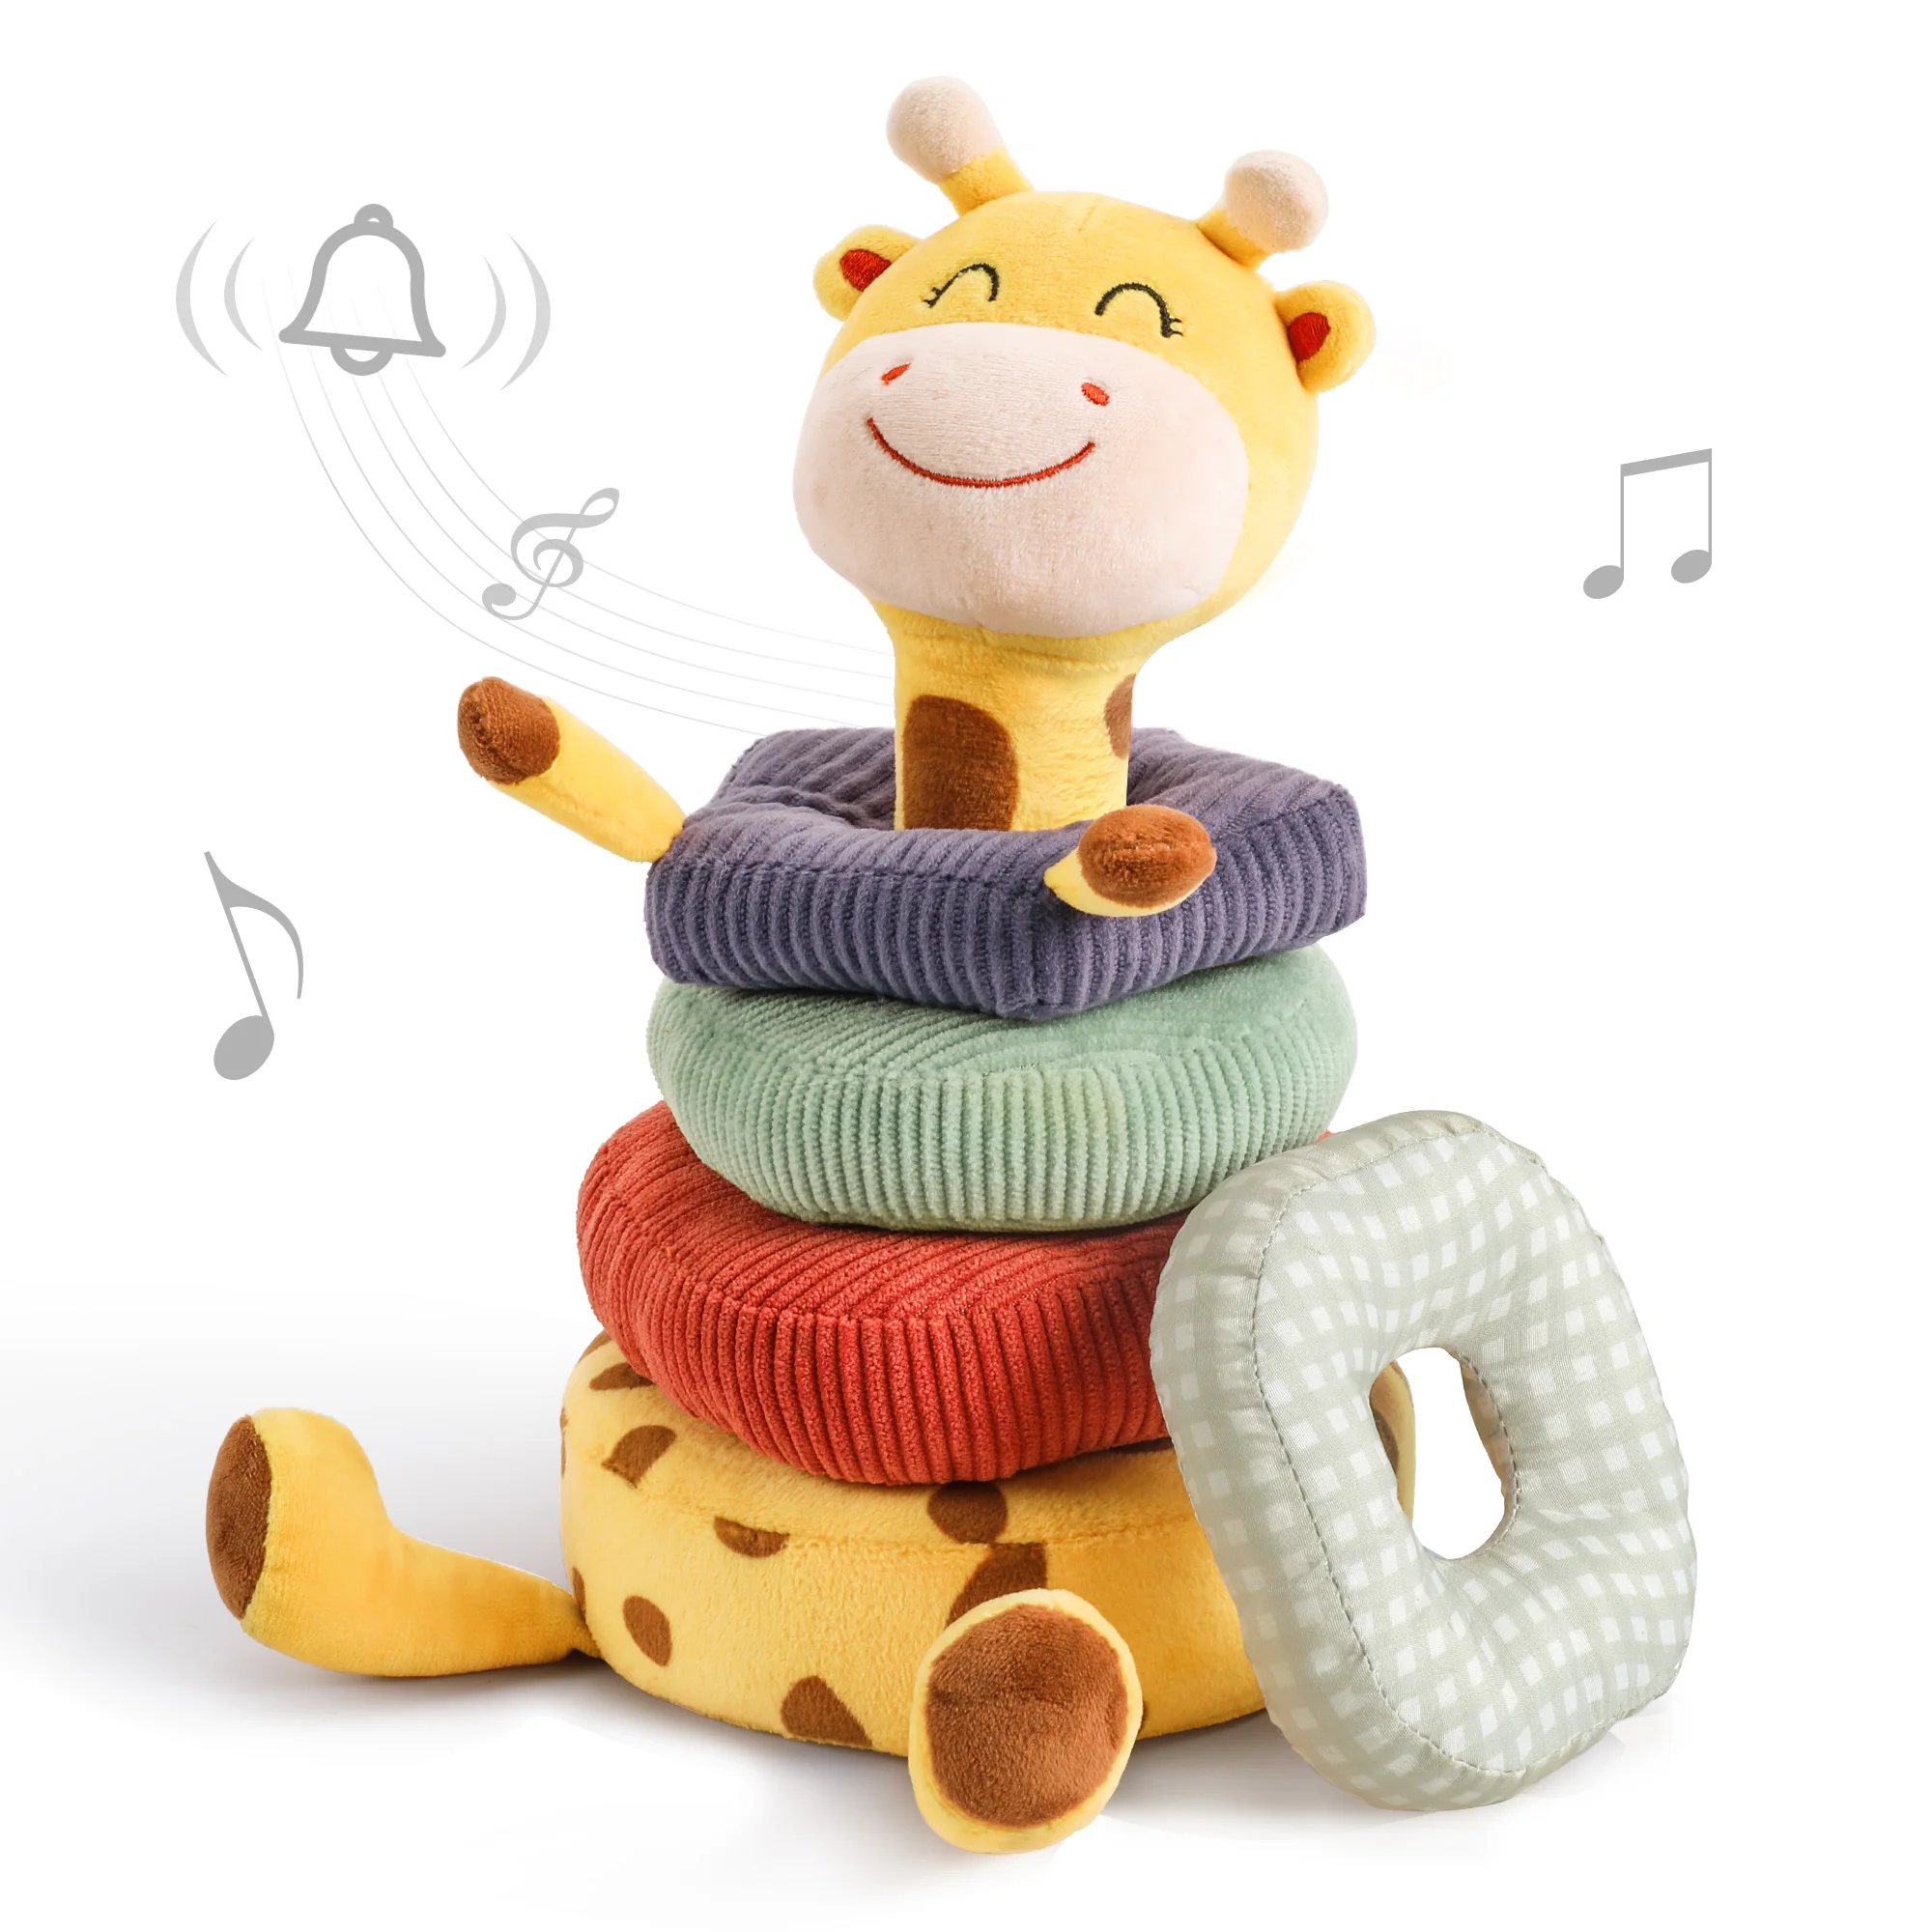 Tumama Kids Unique Design Baby Hand Training Stacking Toy Plush Stuffed Giraffe Stacking Tower Baby Soft Toys For Kids